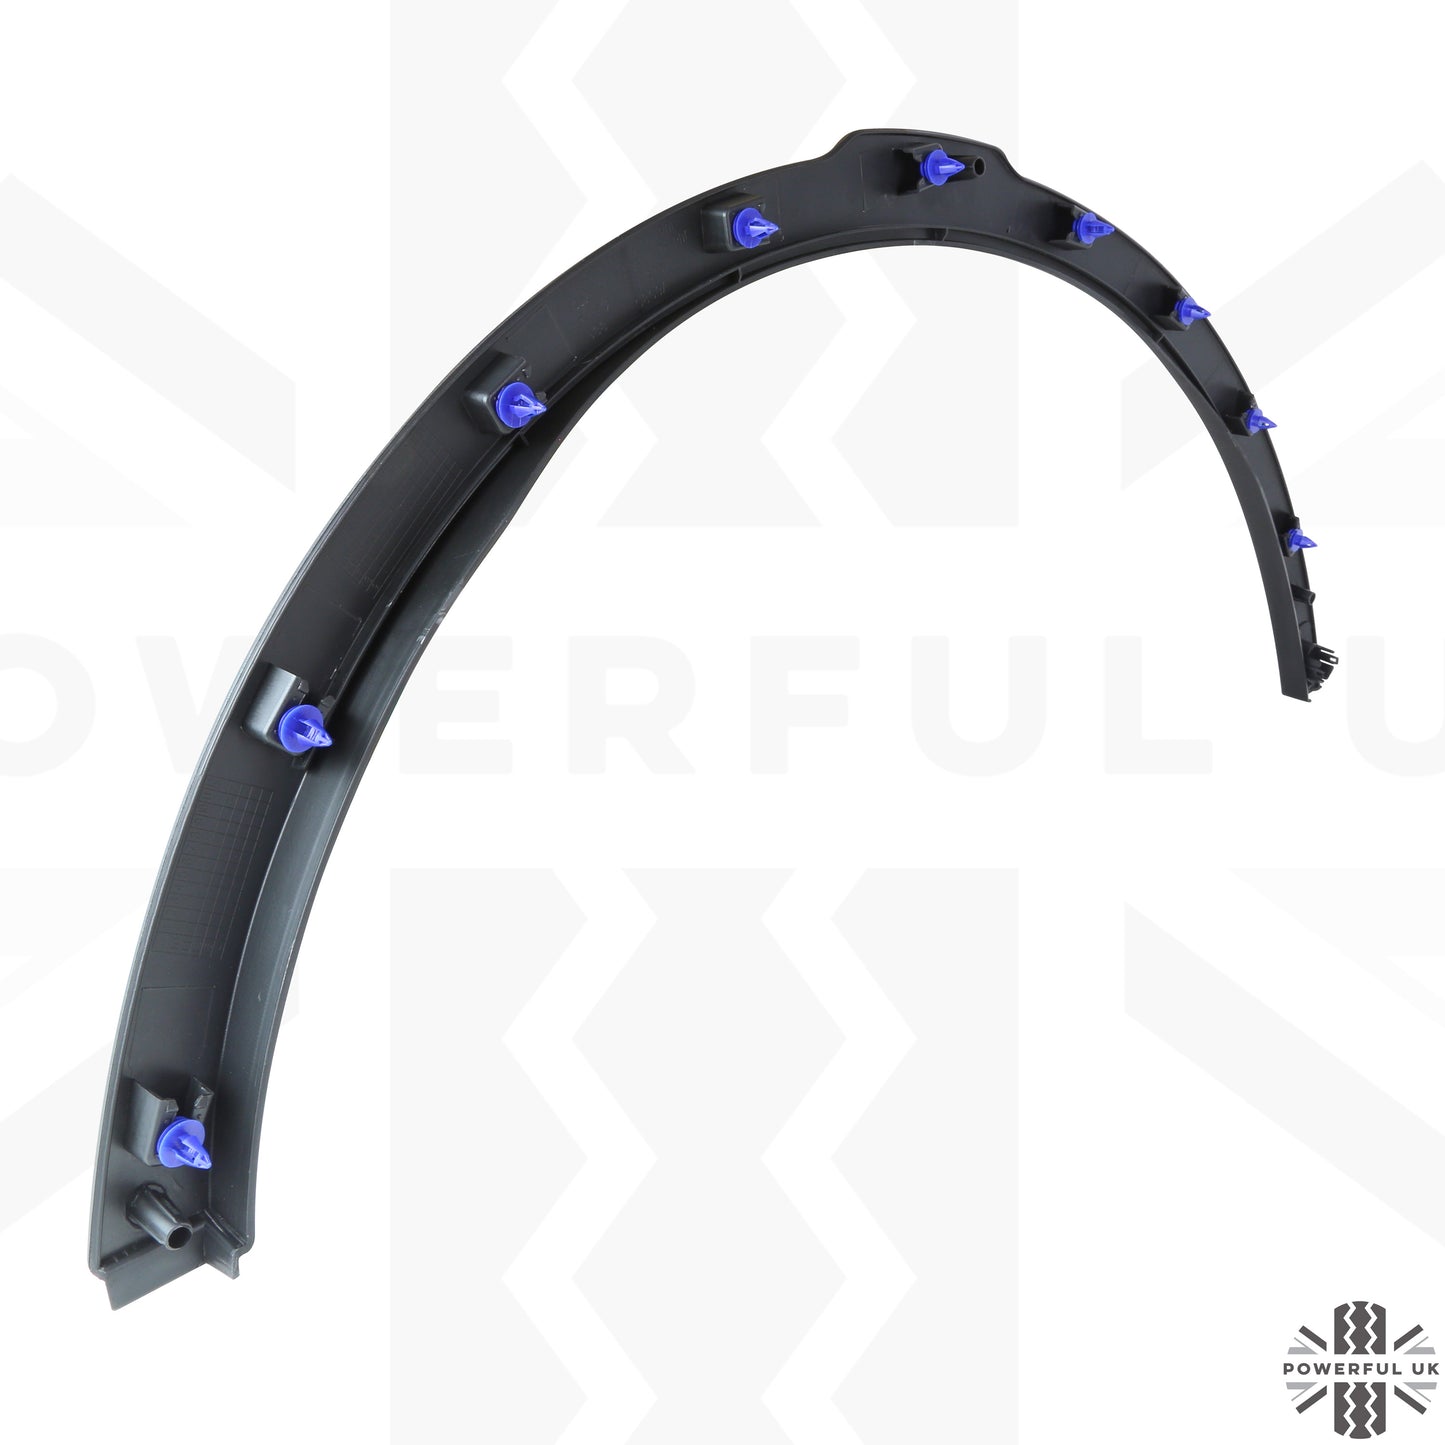 Front Wheel Arch Trim with PDC Hole for Range Rover Evoque 1 (2011-18) - LEFT